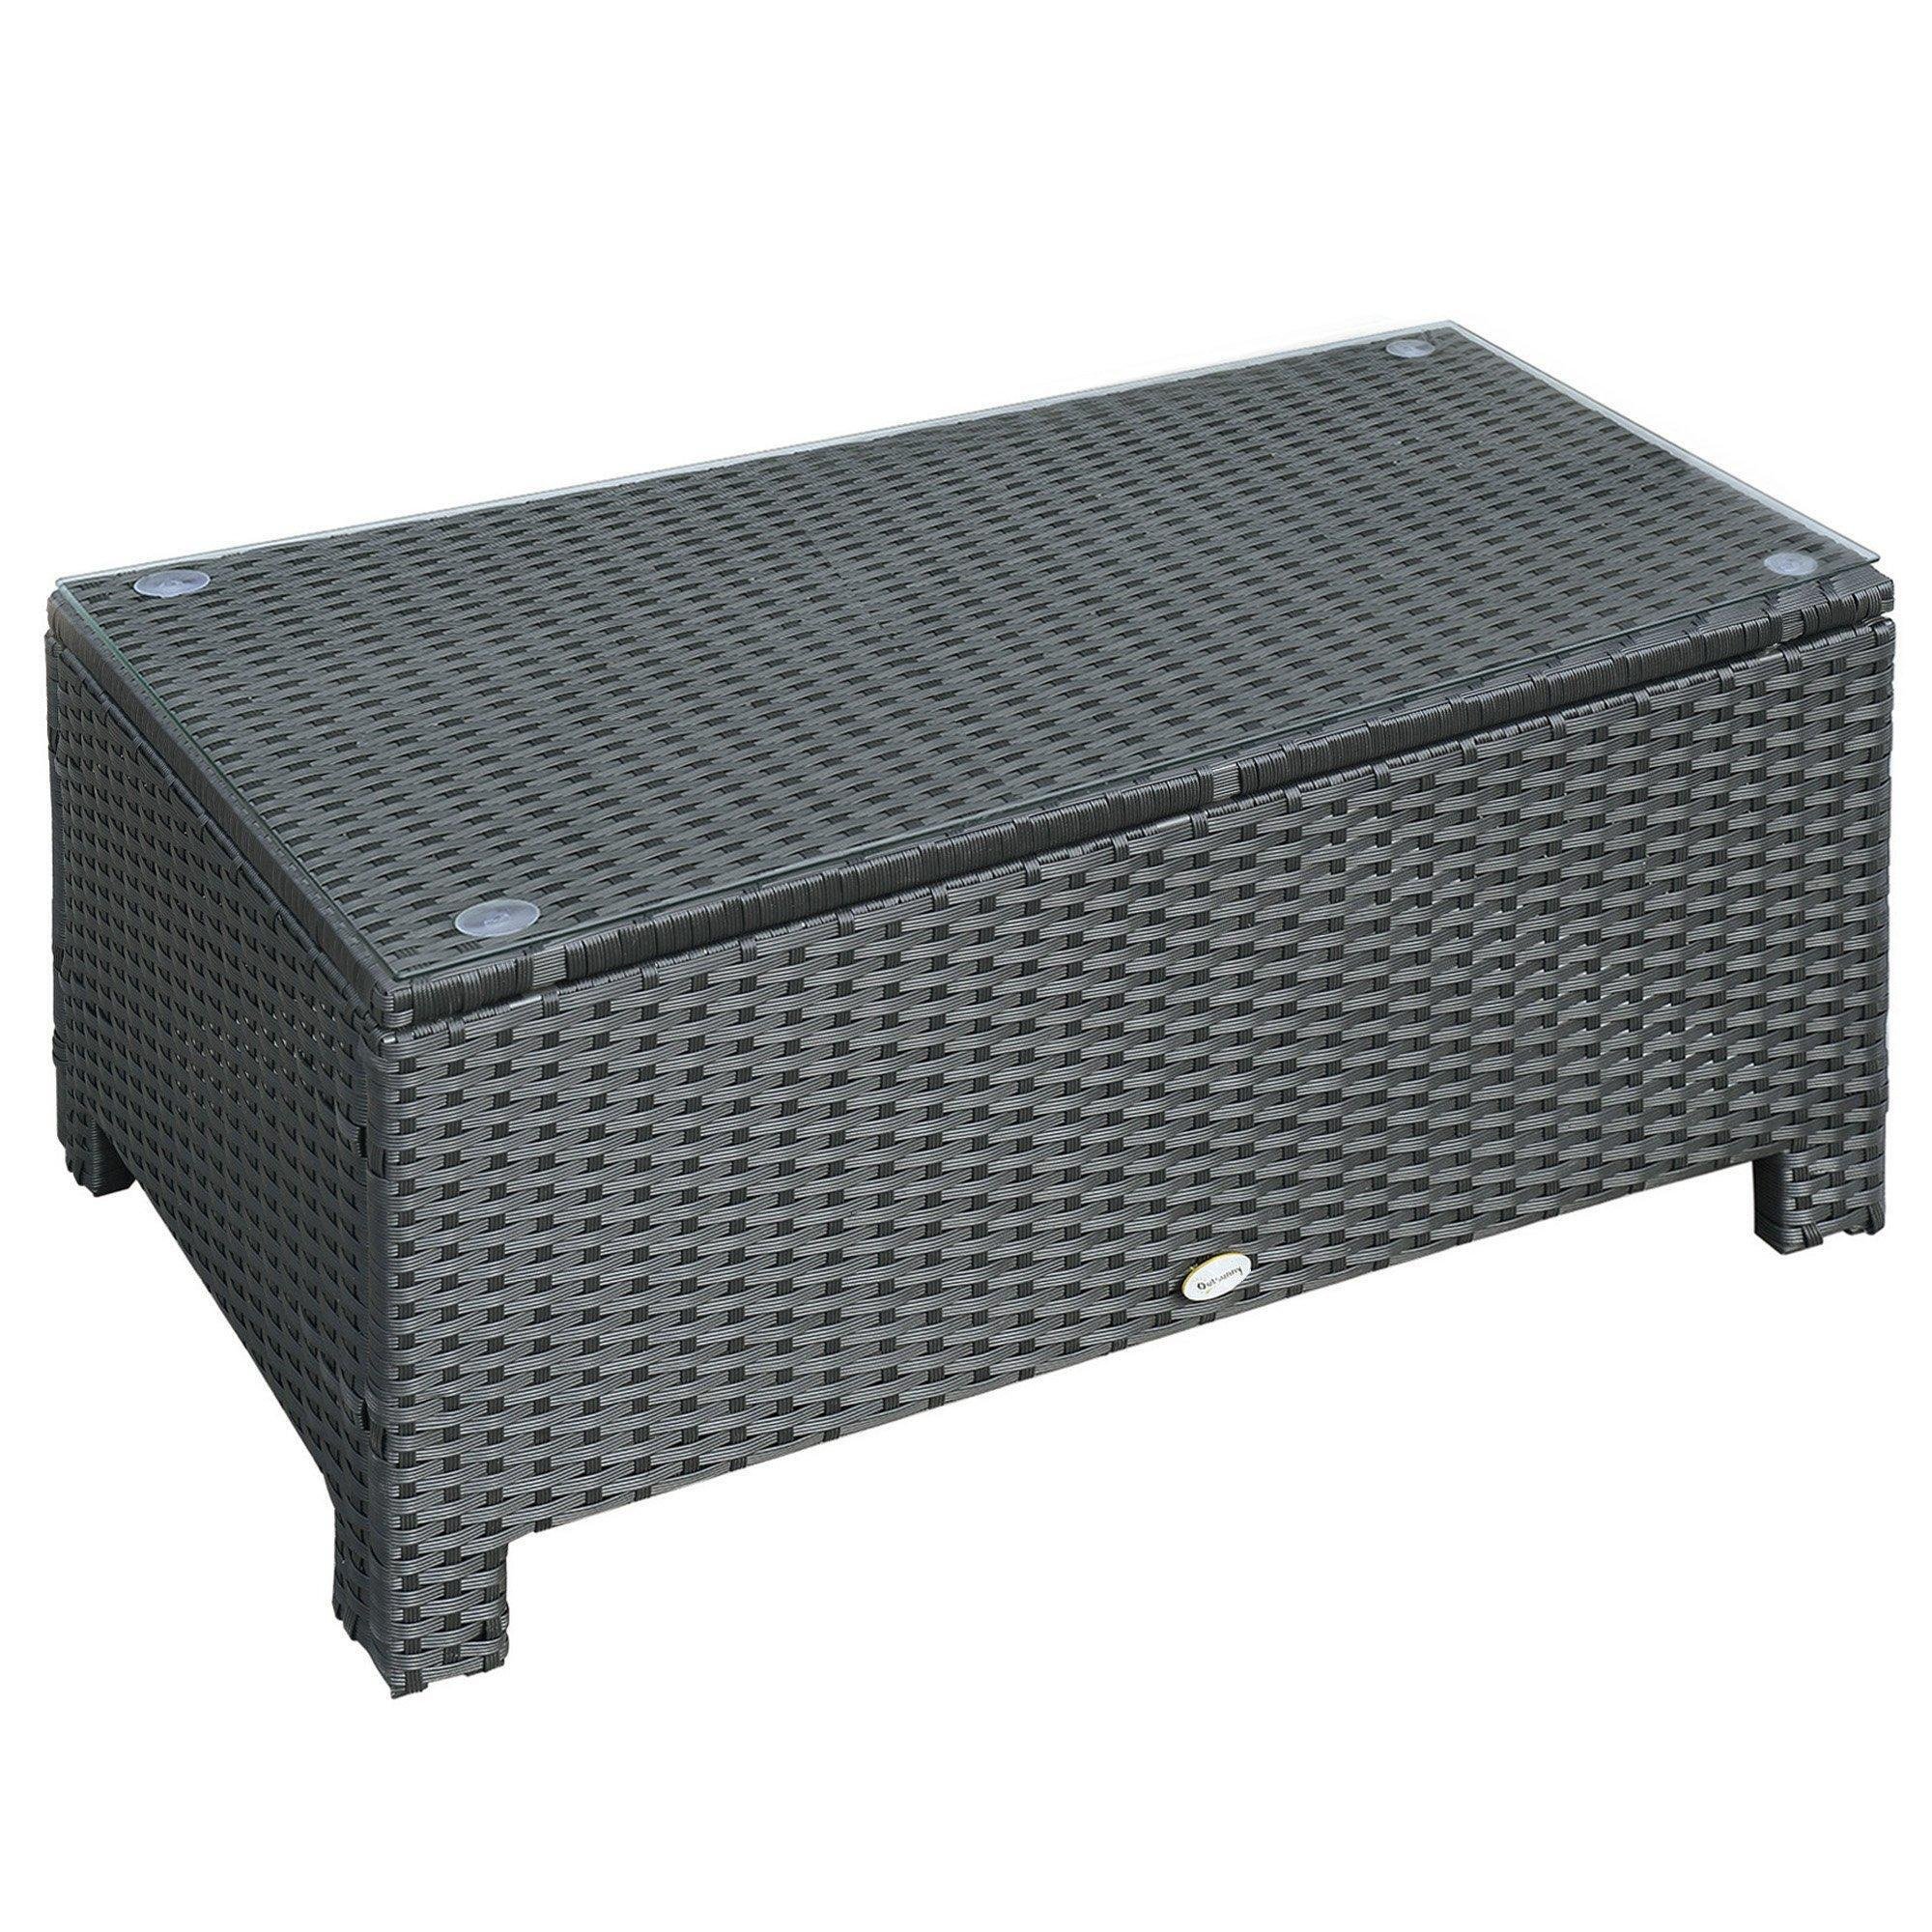 Rattan Garden Furniture Weave Wicker Coffee Table with Tempered Glass - image 1